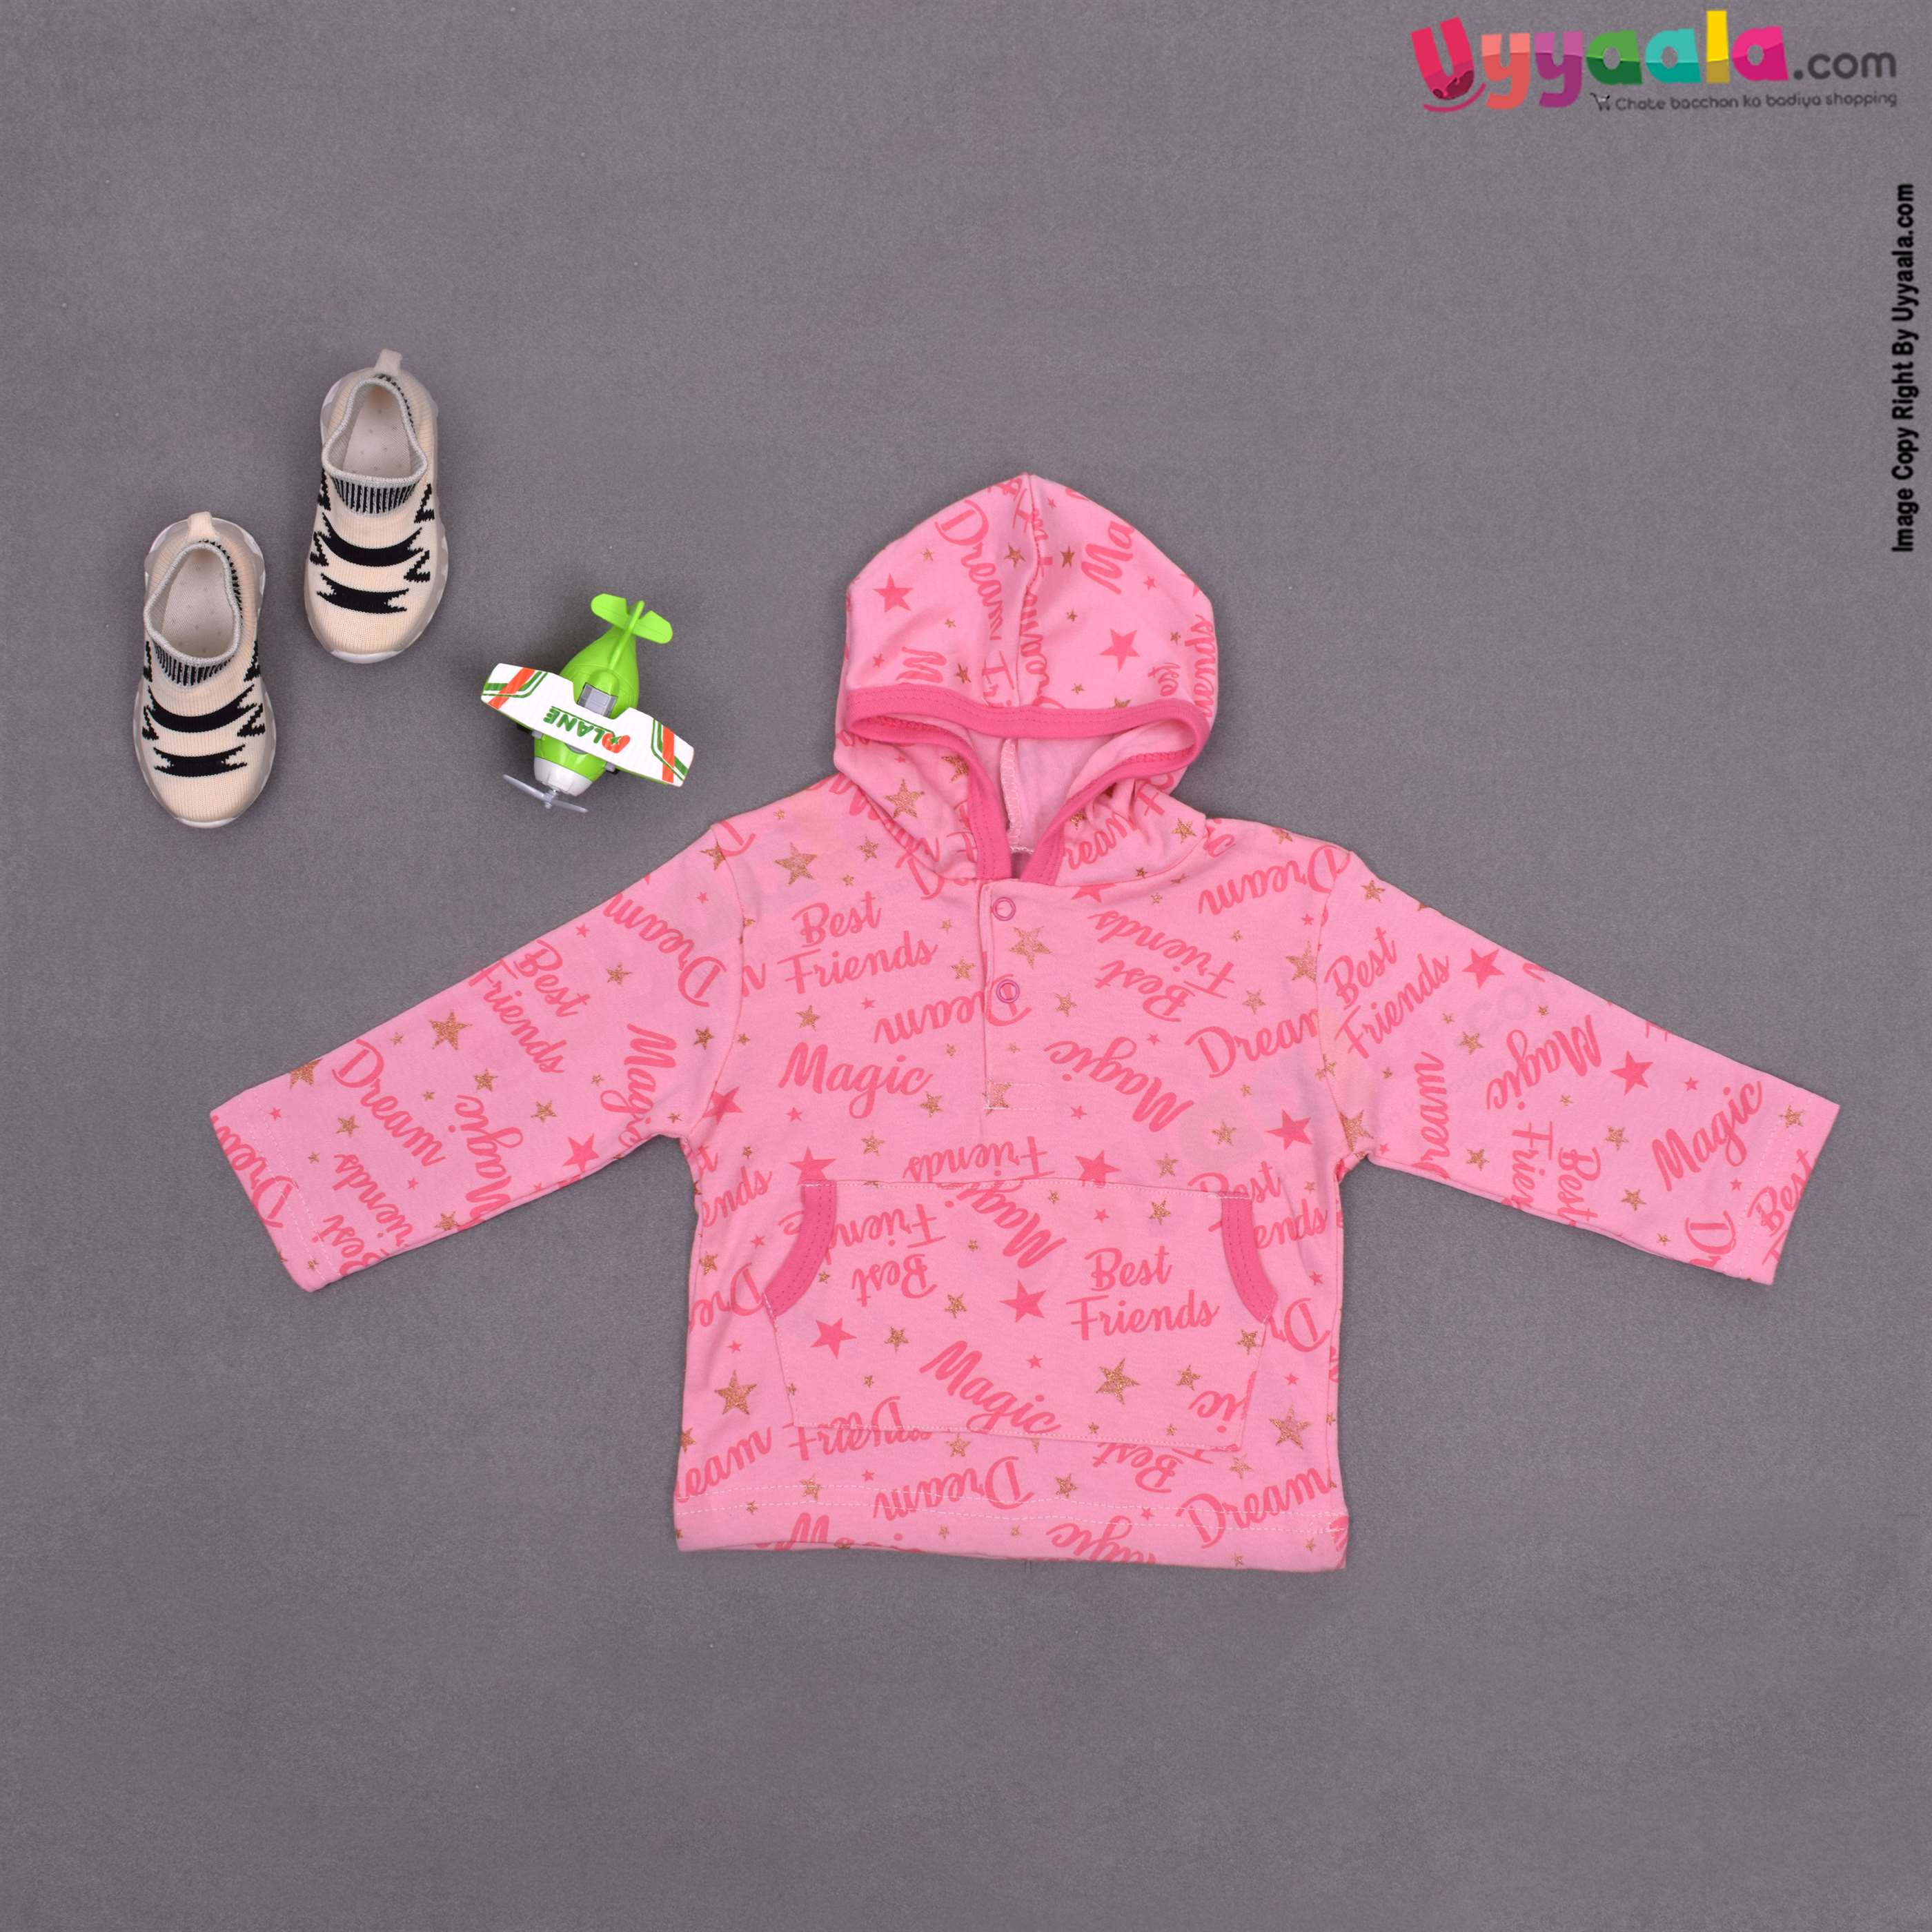 PRECIOUS Full sleeves hoodies t - shirt, cotton - pink with text & glittering star print